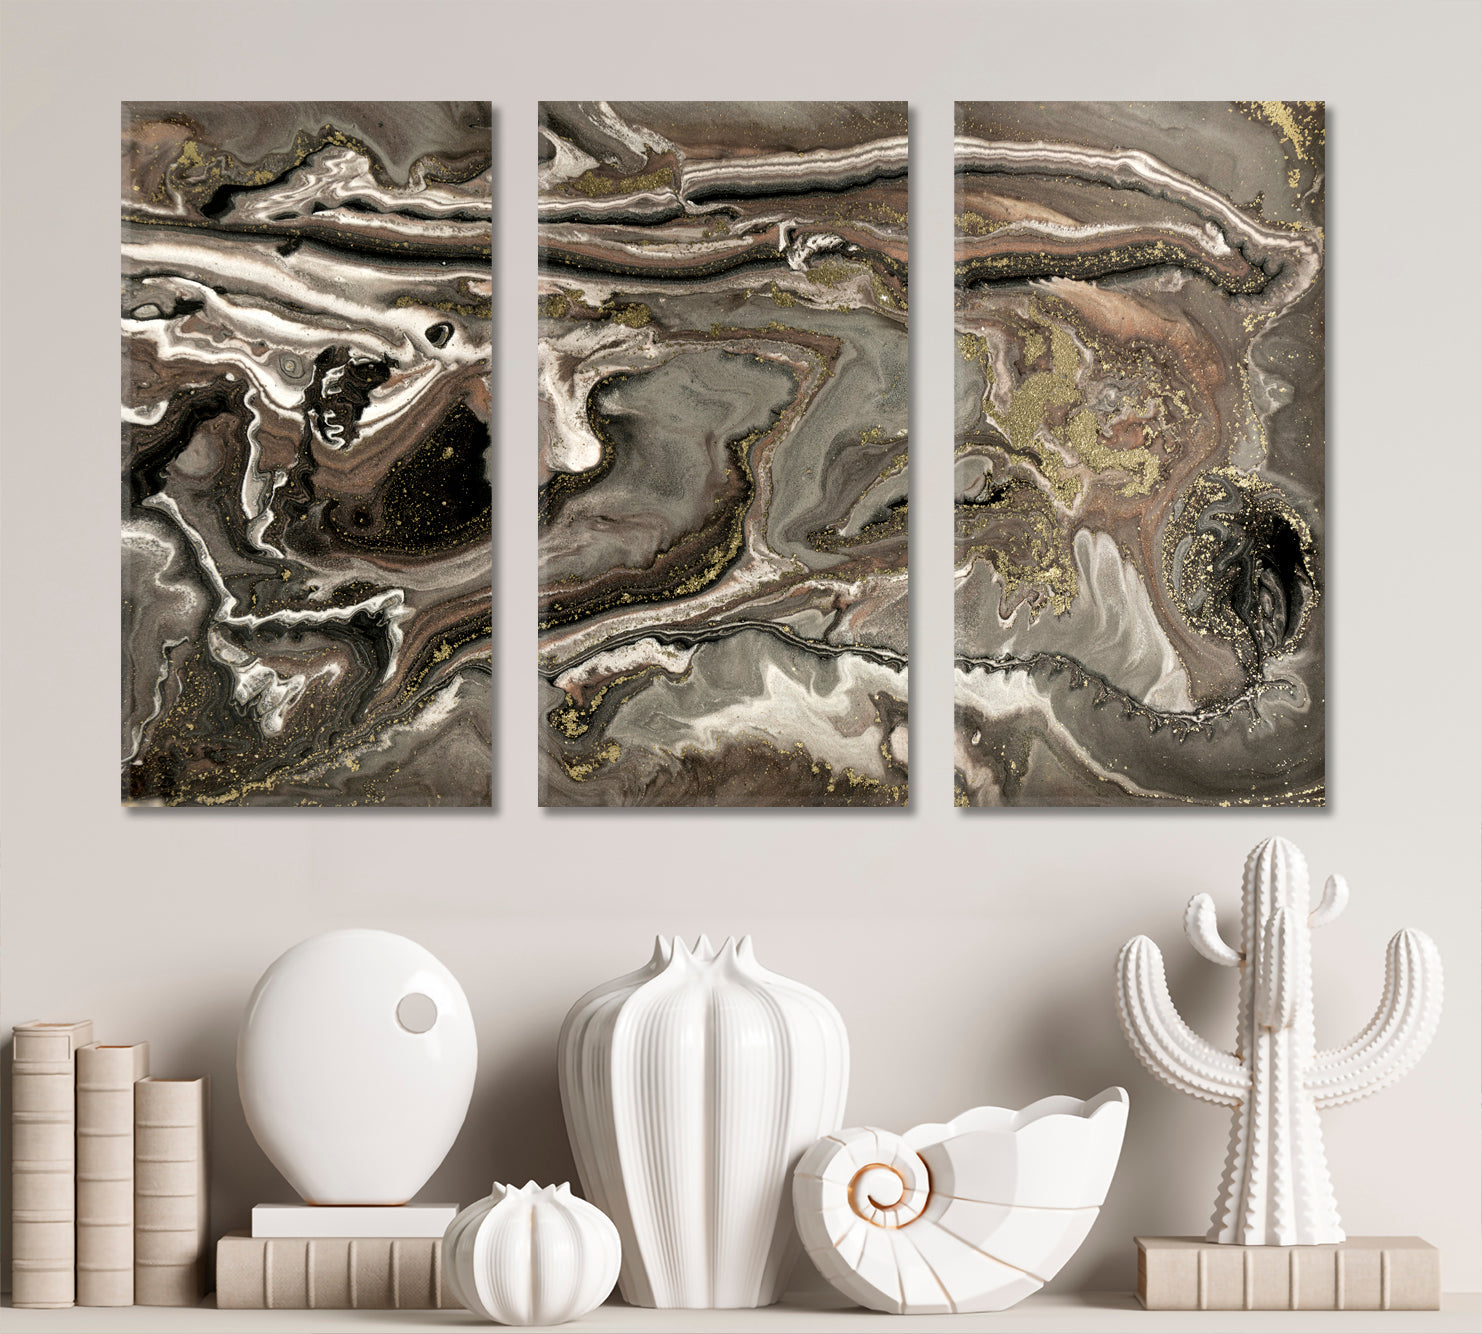 MOTHER OF PEARL Brown Pearlescent Colors Gold Powder Flecks Fluid Art, Oriental Marbling Canvas Print Artesty 3 panels 36" x 24" 